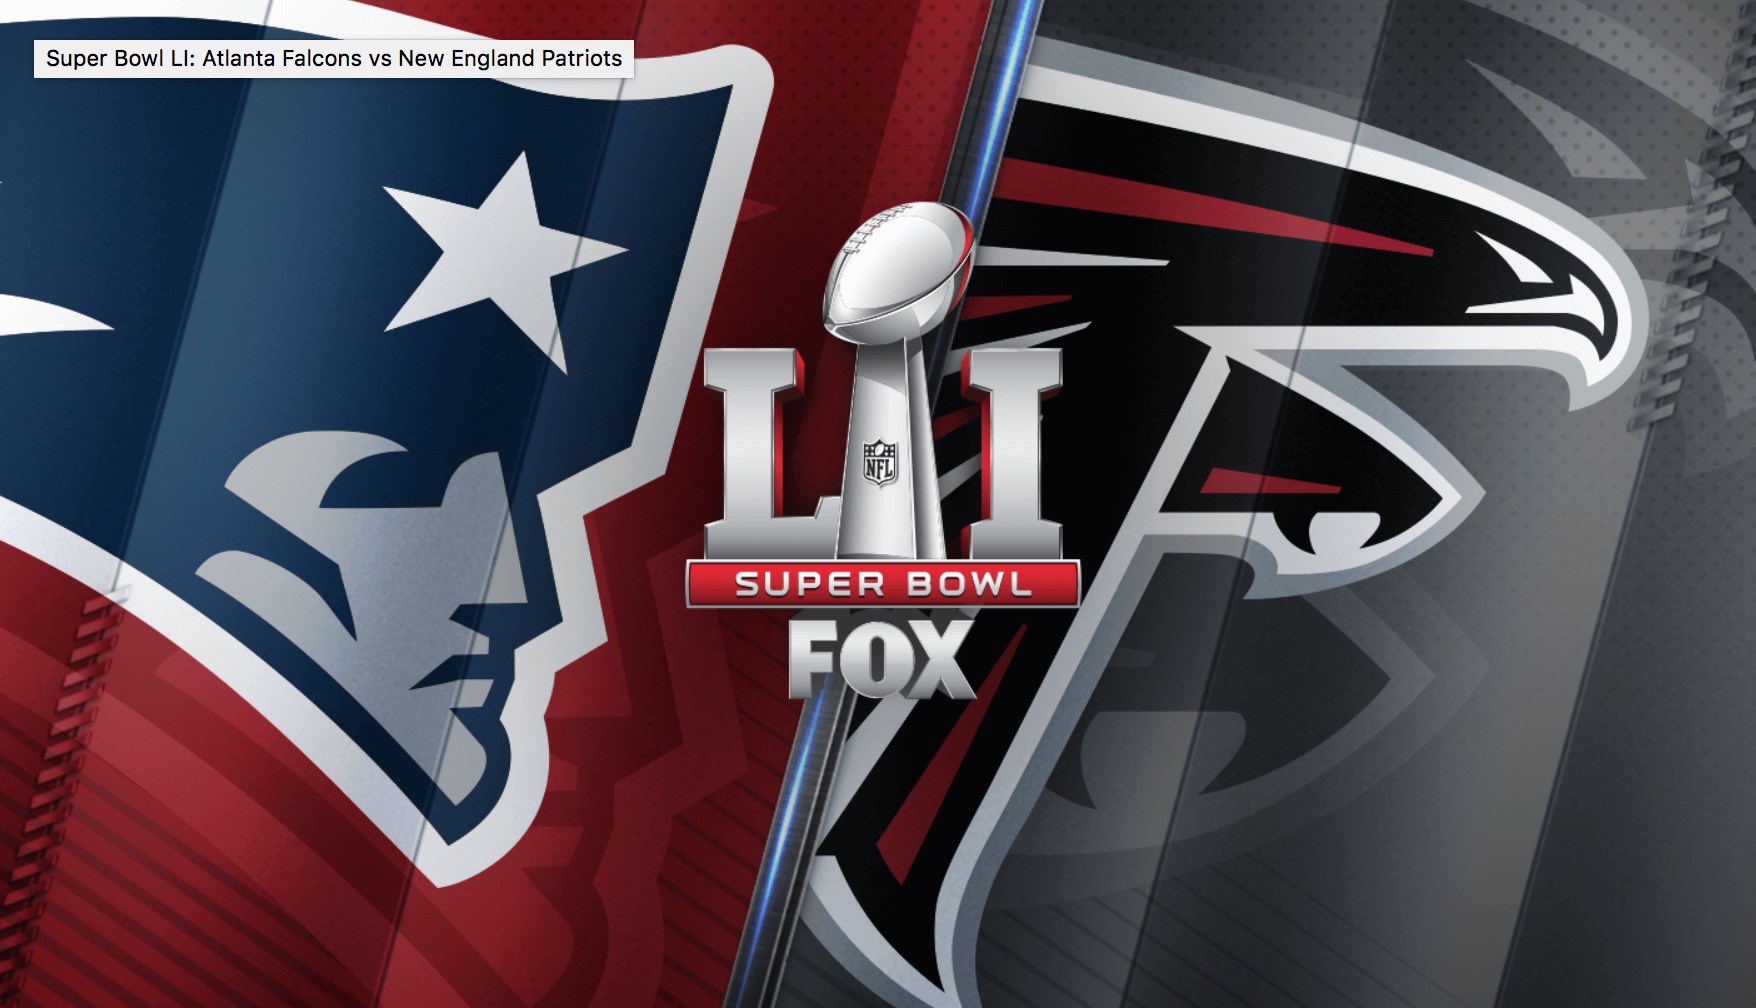 How to Watch Super Bowl 51 Live on iPhone, iPad, Mac, PC, Apple TV